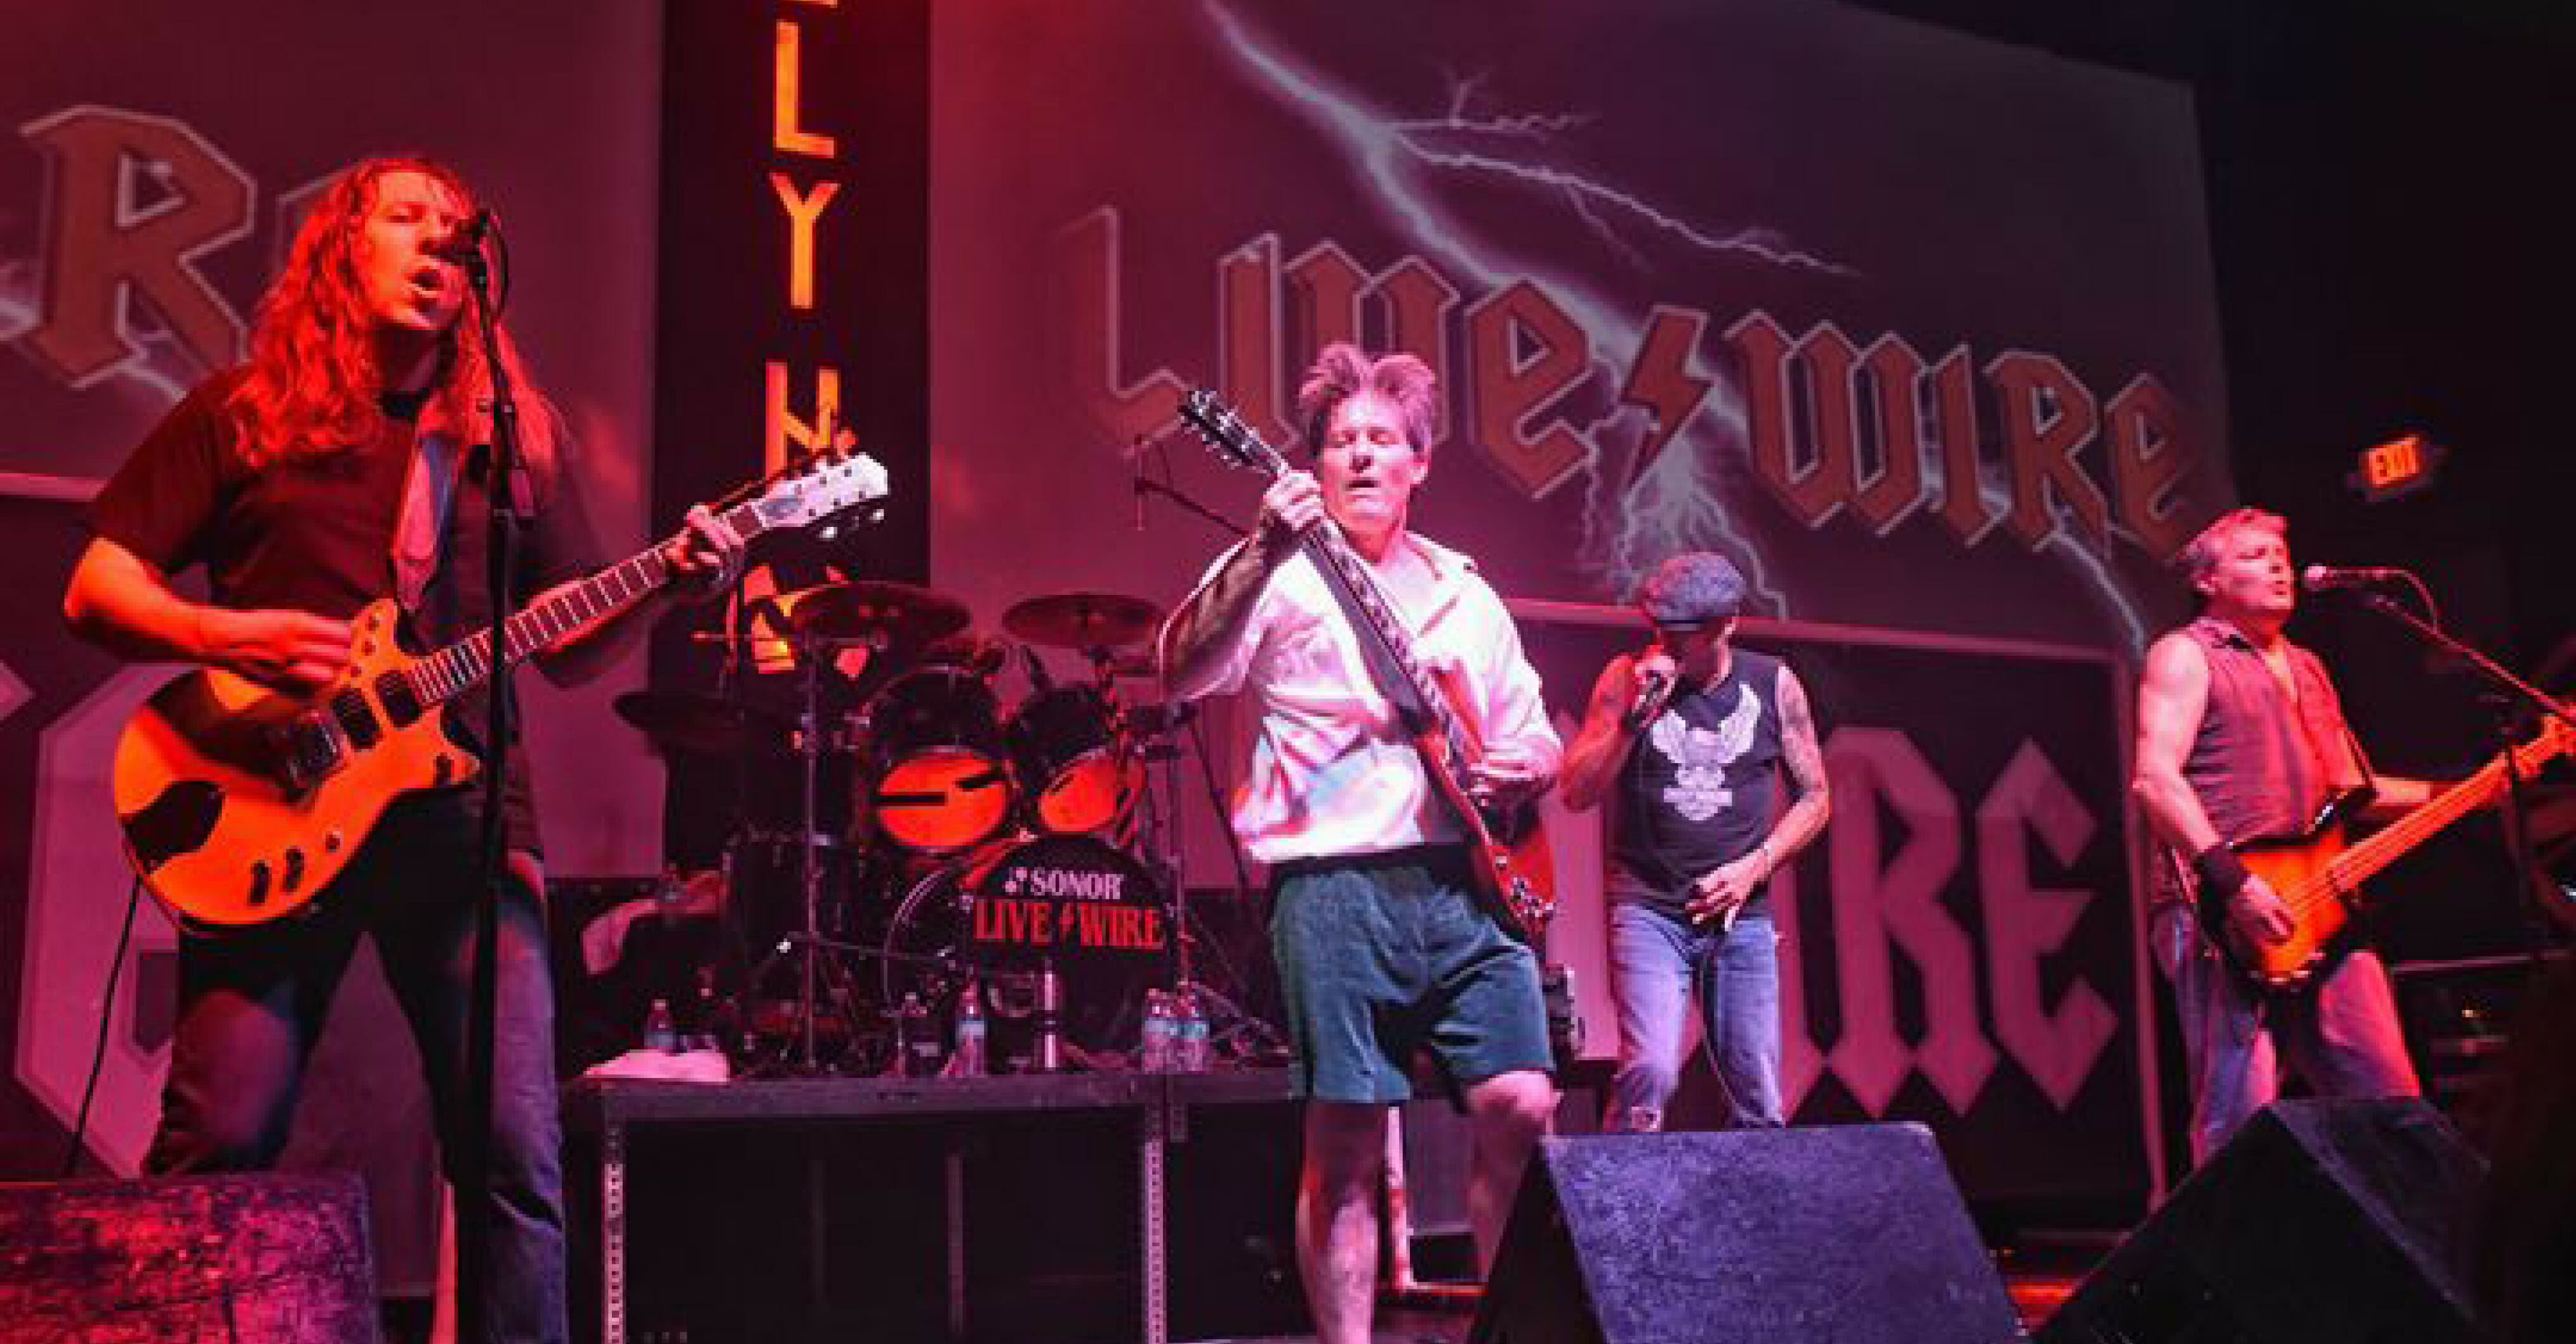 Live Wire A Tribute to AC/DC